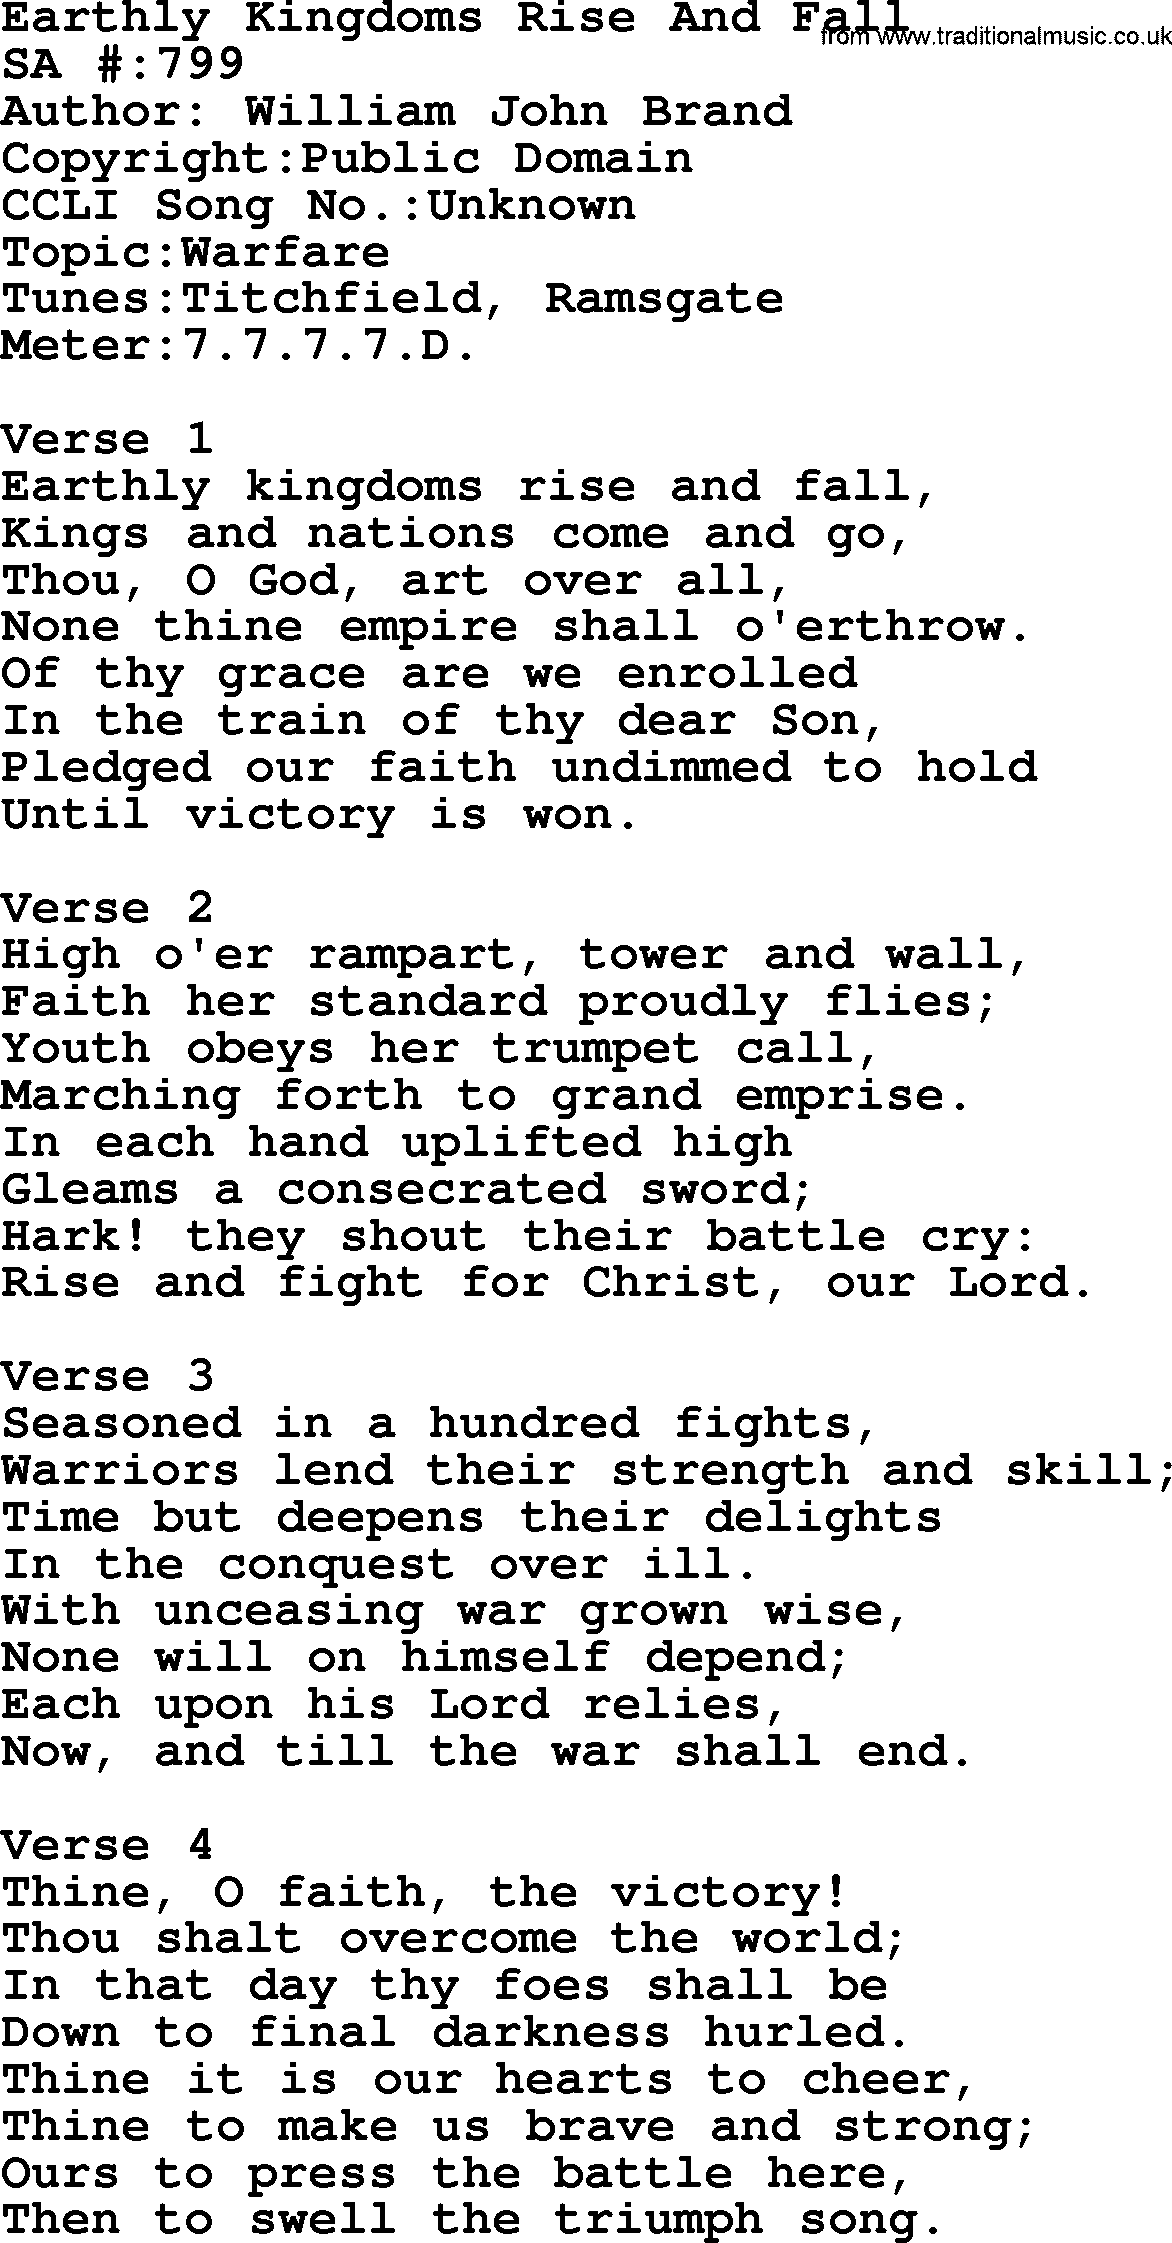 Salvation Army Hymnal, title: Earthly Kingdoms Rise And Fall, with lyrics and PDF,